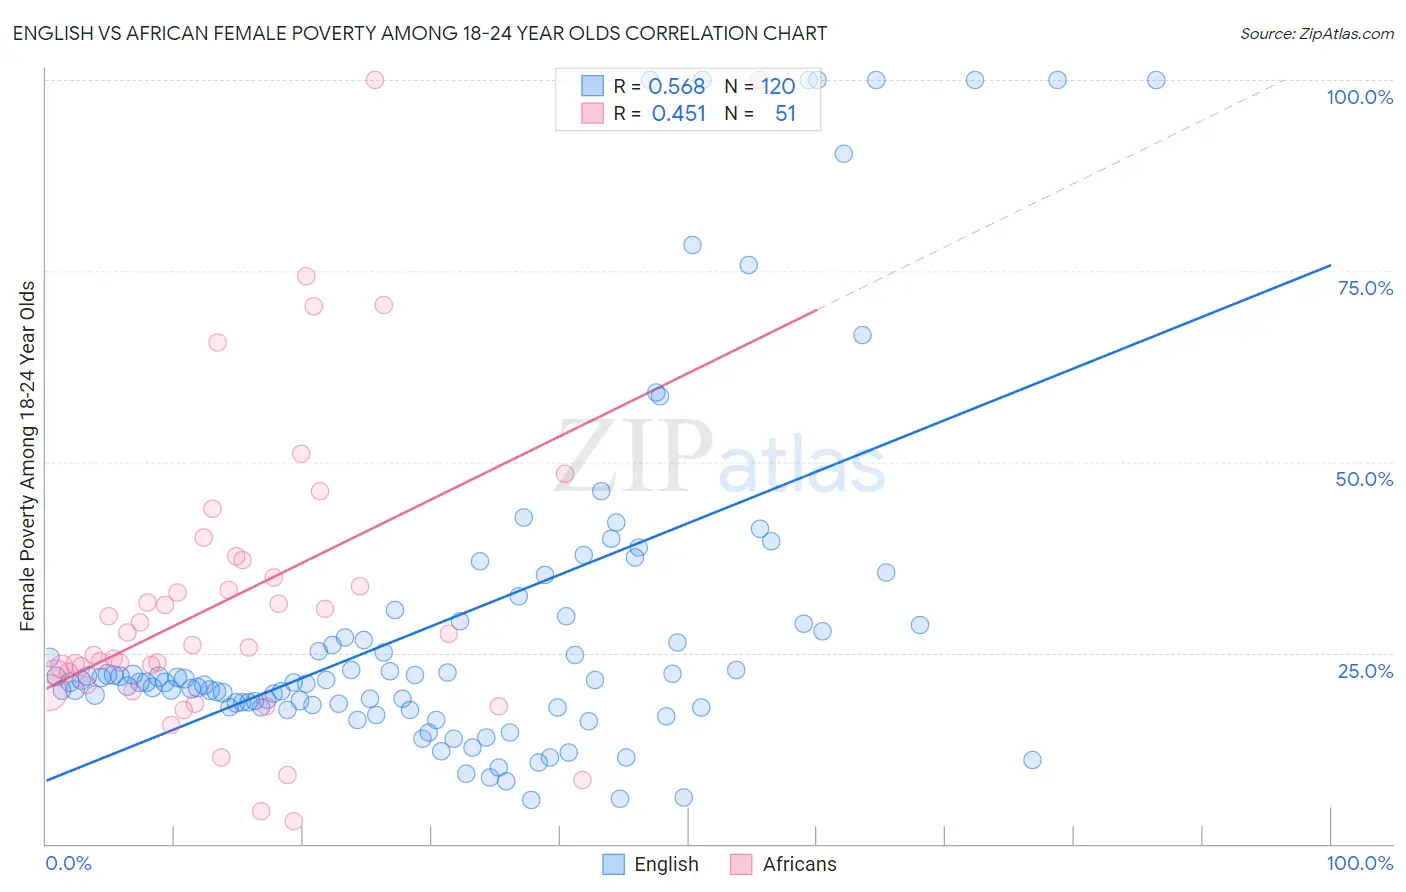 English vs African Female Poverty Among 18-24 Year Olds